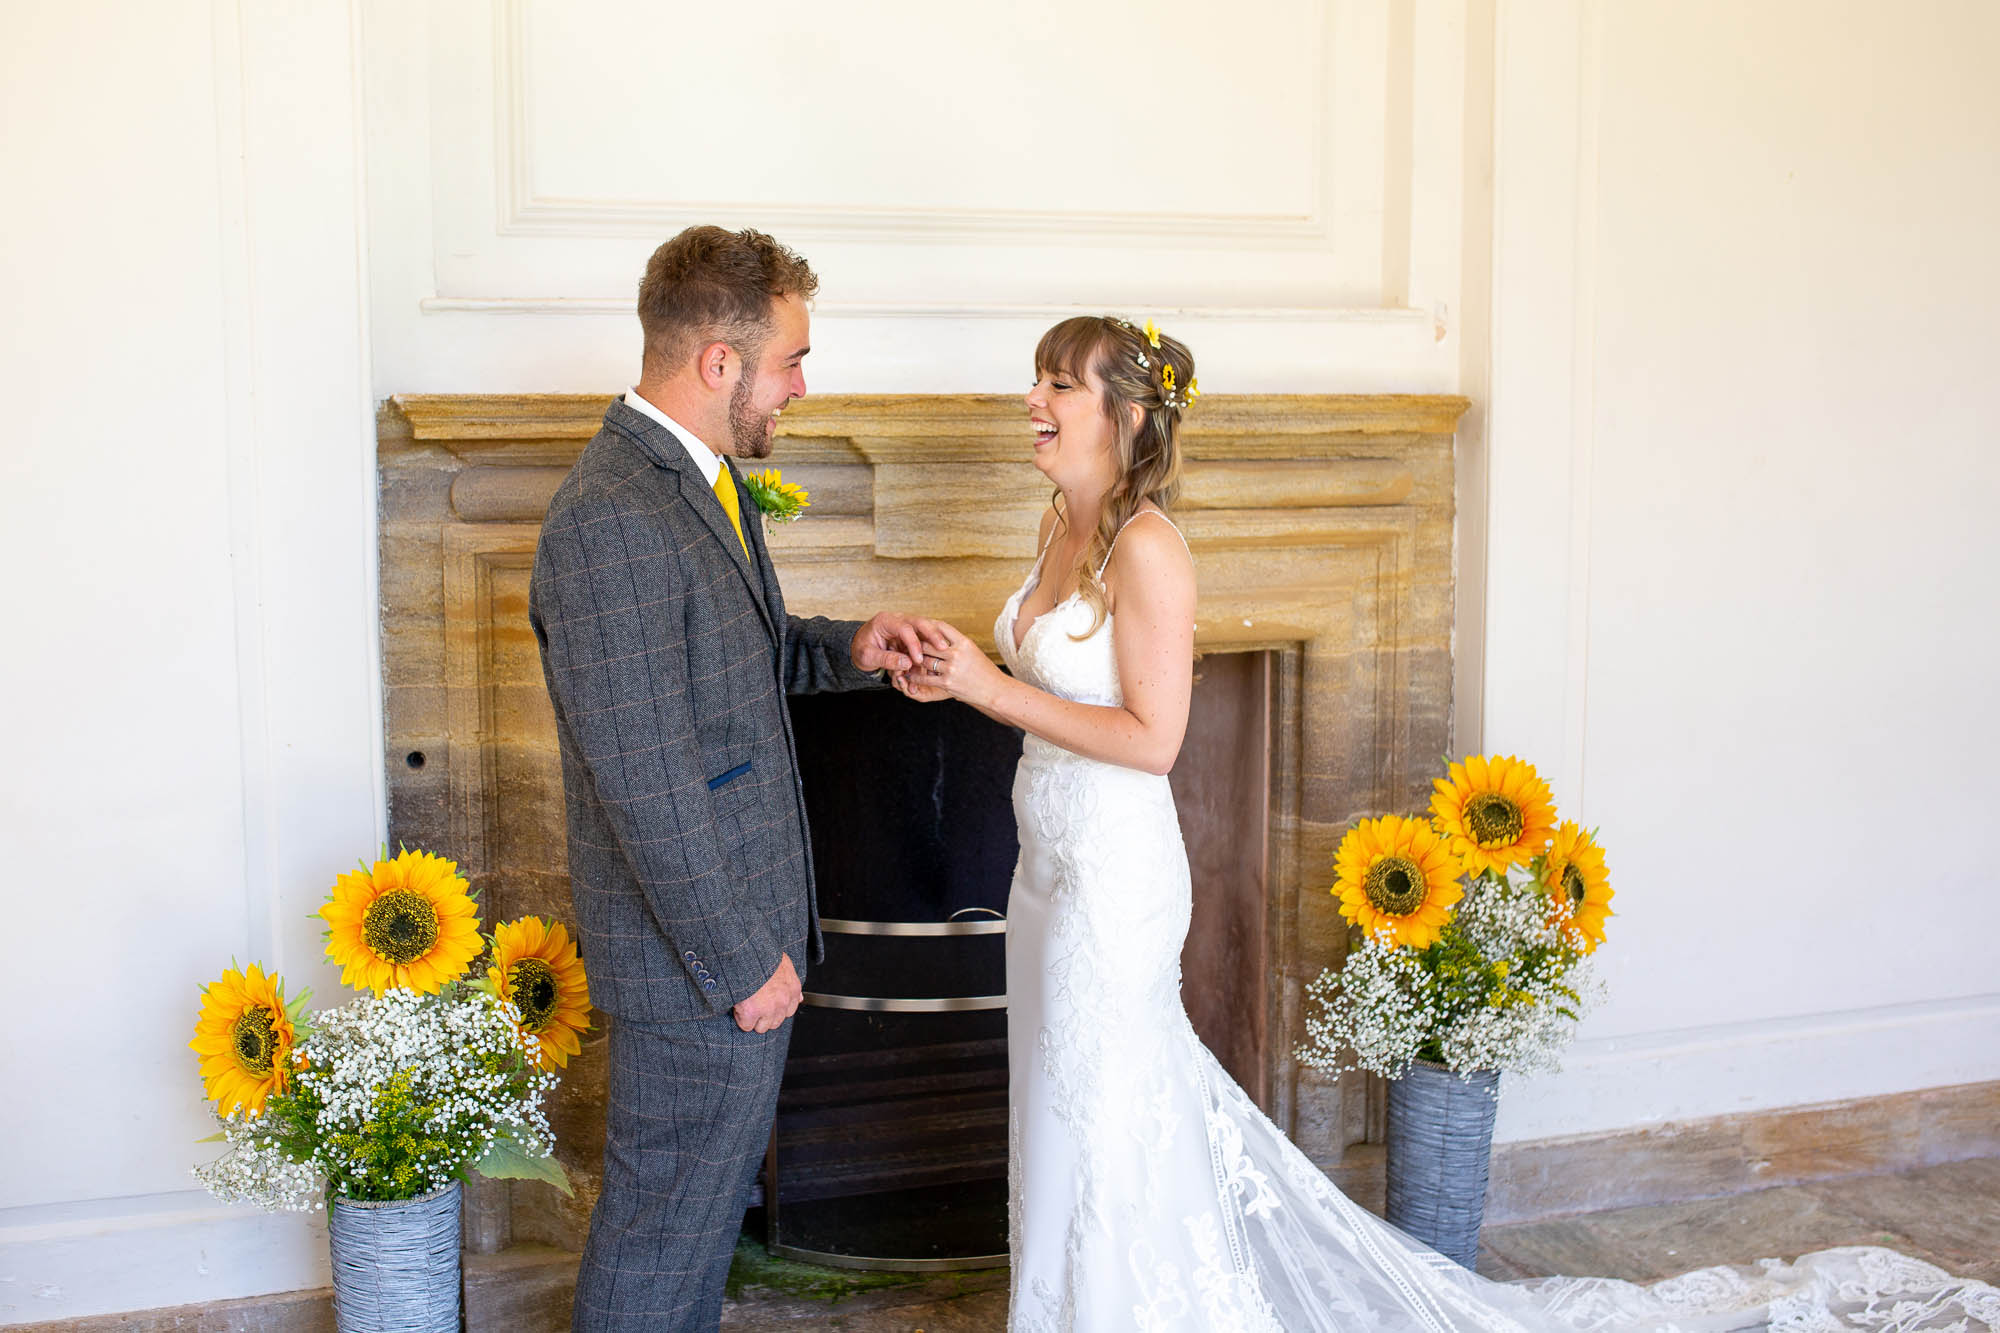 Meg wears an Enzoani dress for her summer wedding to Joe at sunny Hestercombe Gardens. With Martin Dabek Photography